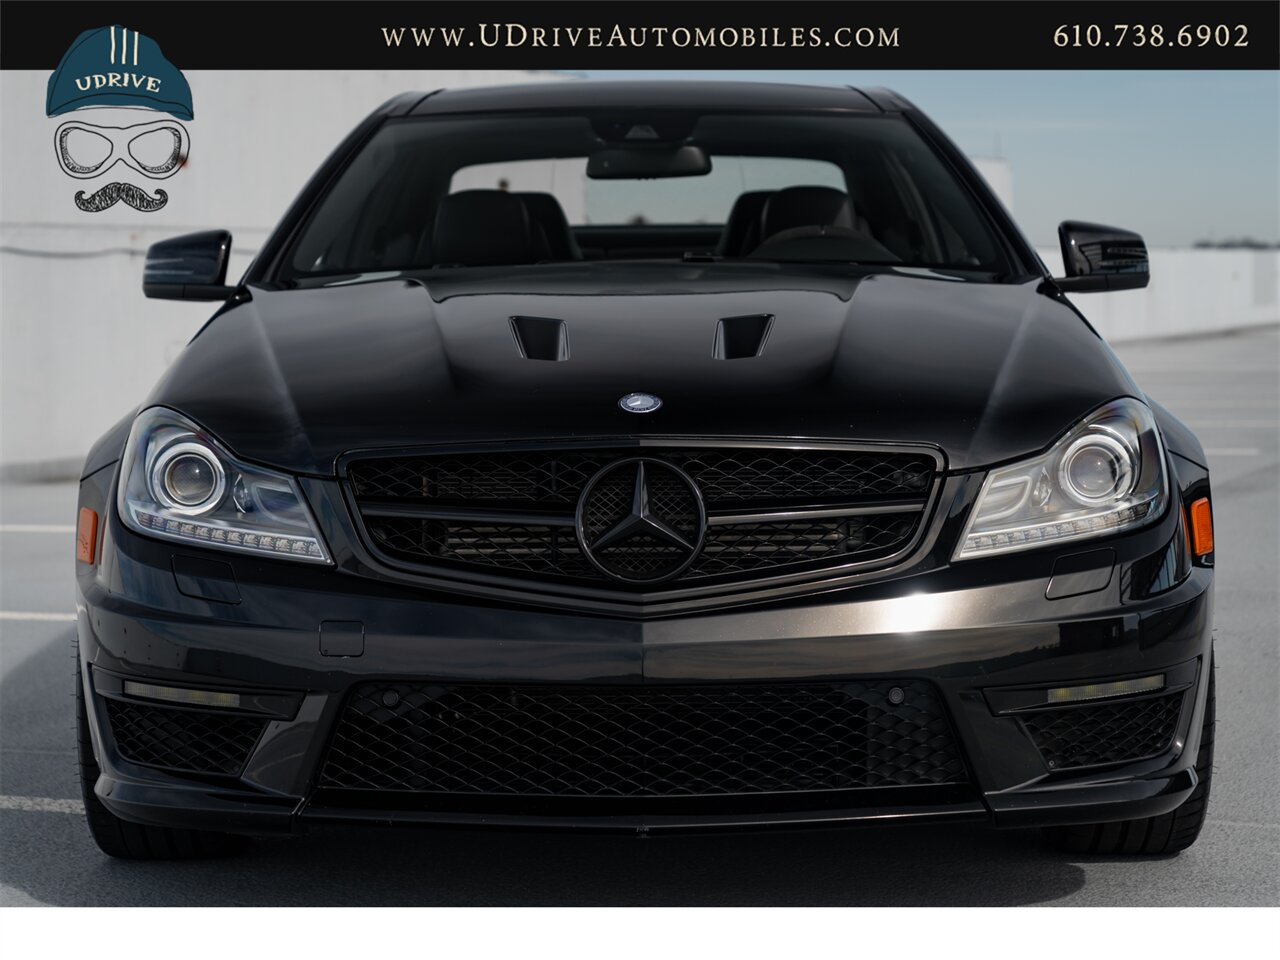 2015 Mercedes-Benz C63 AMG  Edition 507 17k Miles Pano Sunroof Locking Diff 507hp - Photo 13 - West Chester, PA 19382